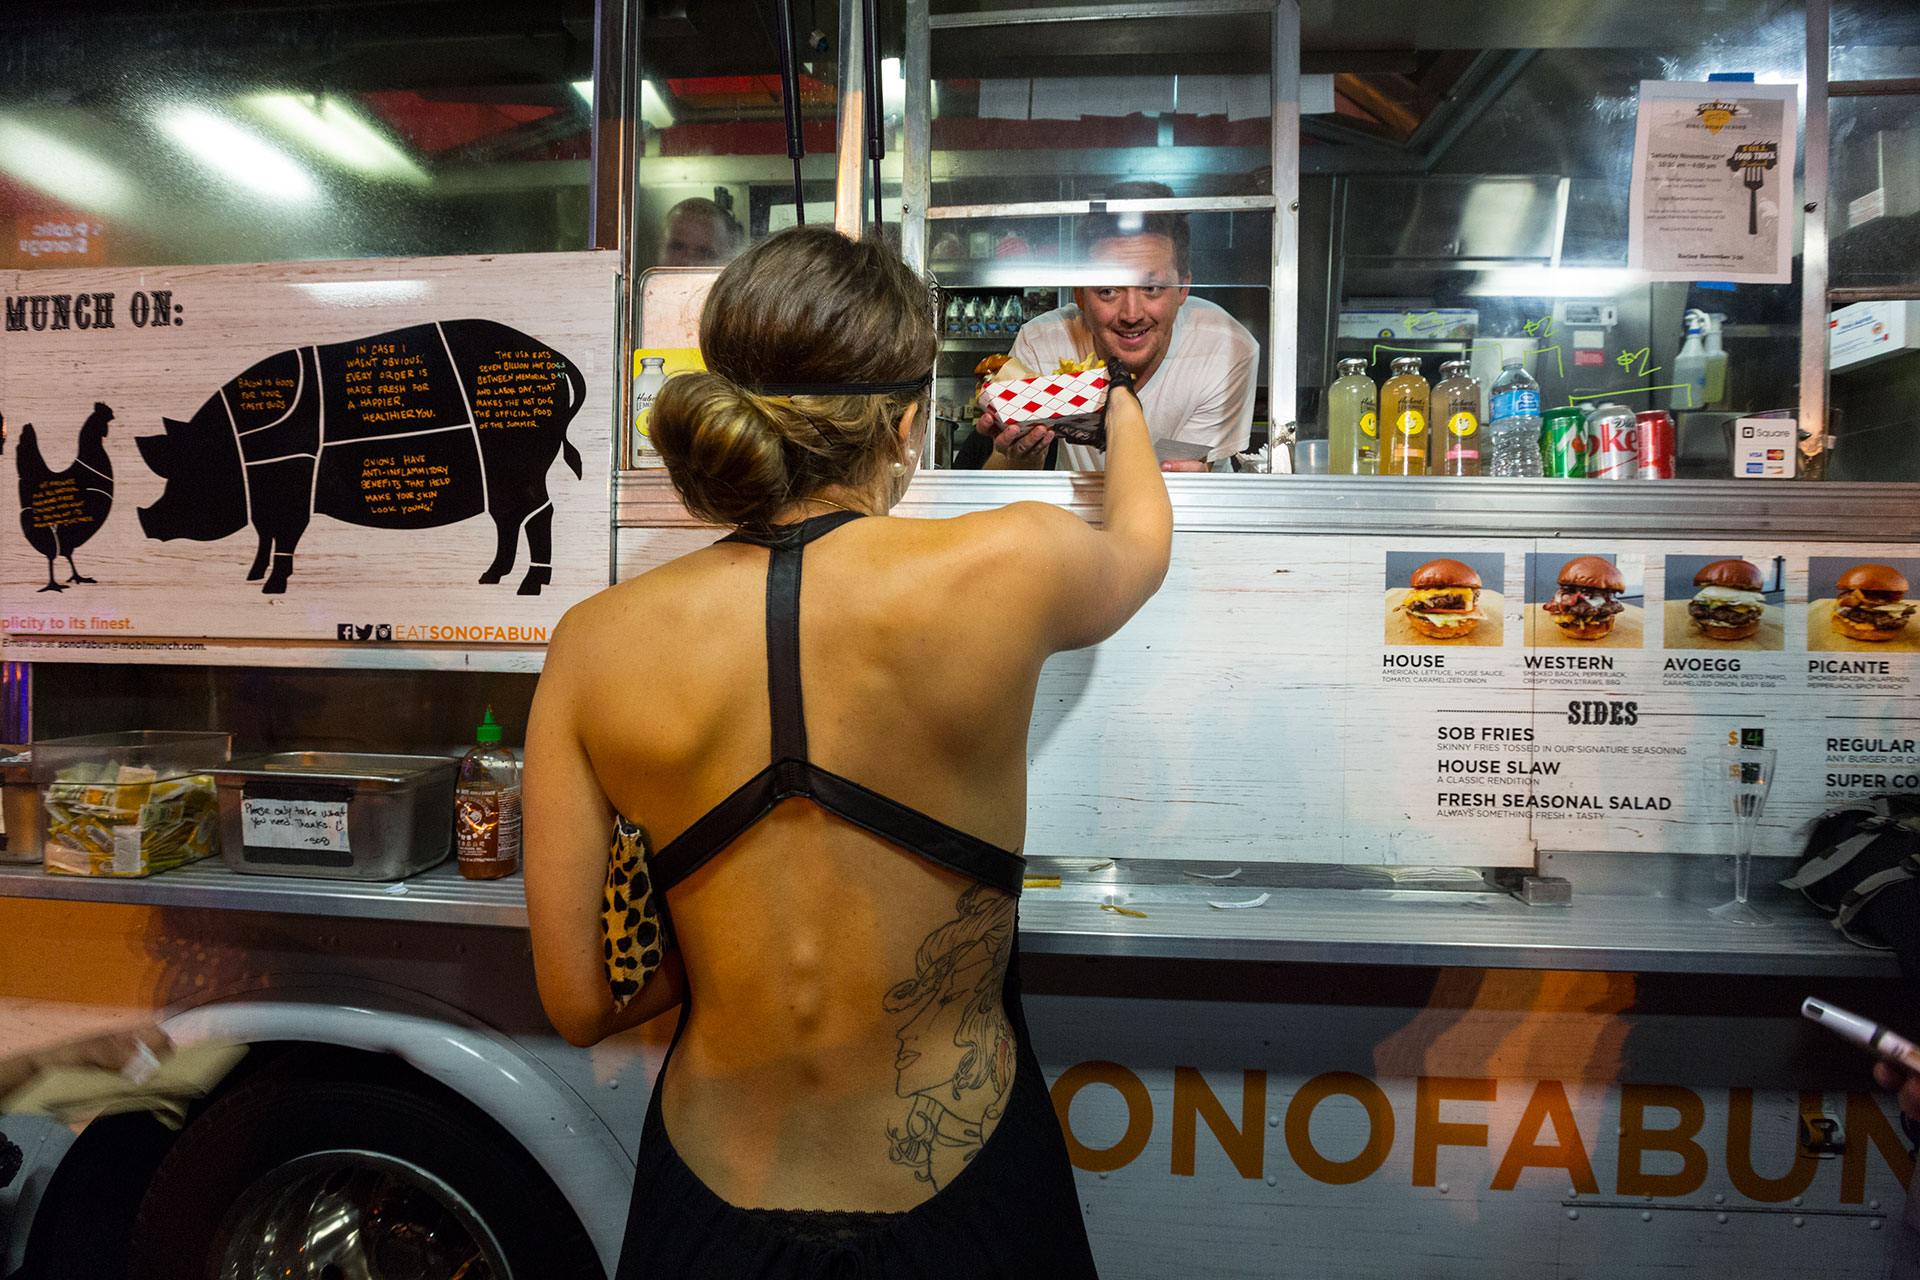  Food trucks attract all segments of society in Los Angeles.  Los Angeles, CA.  